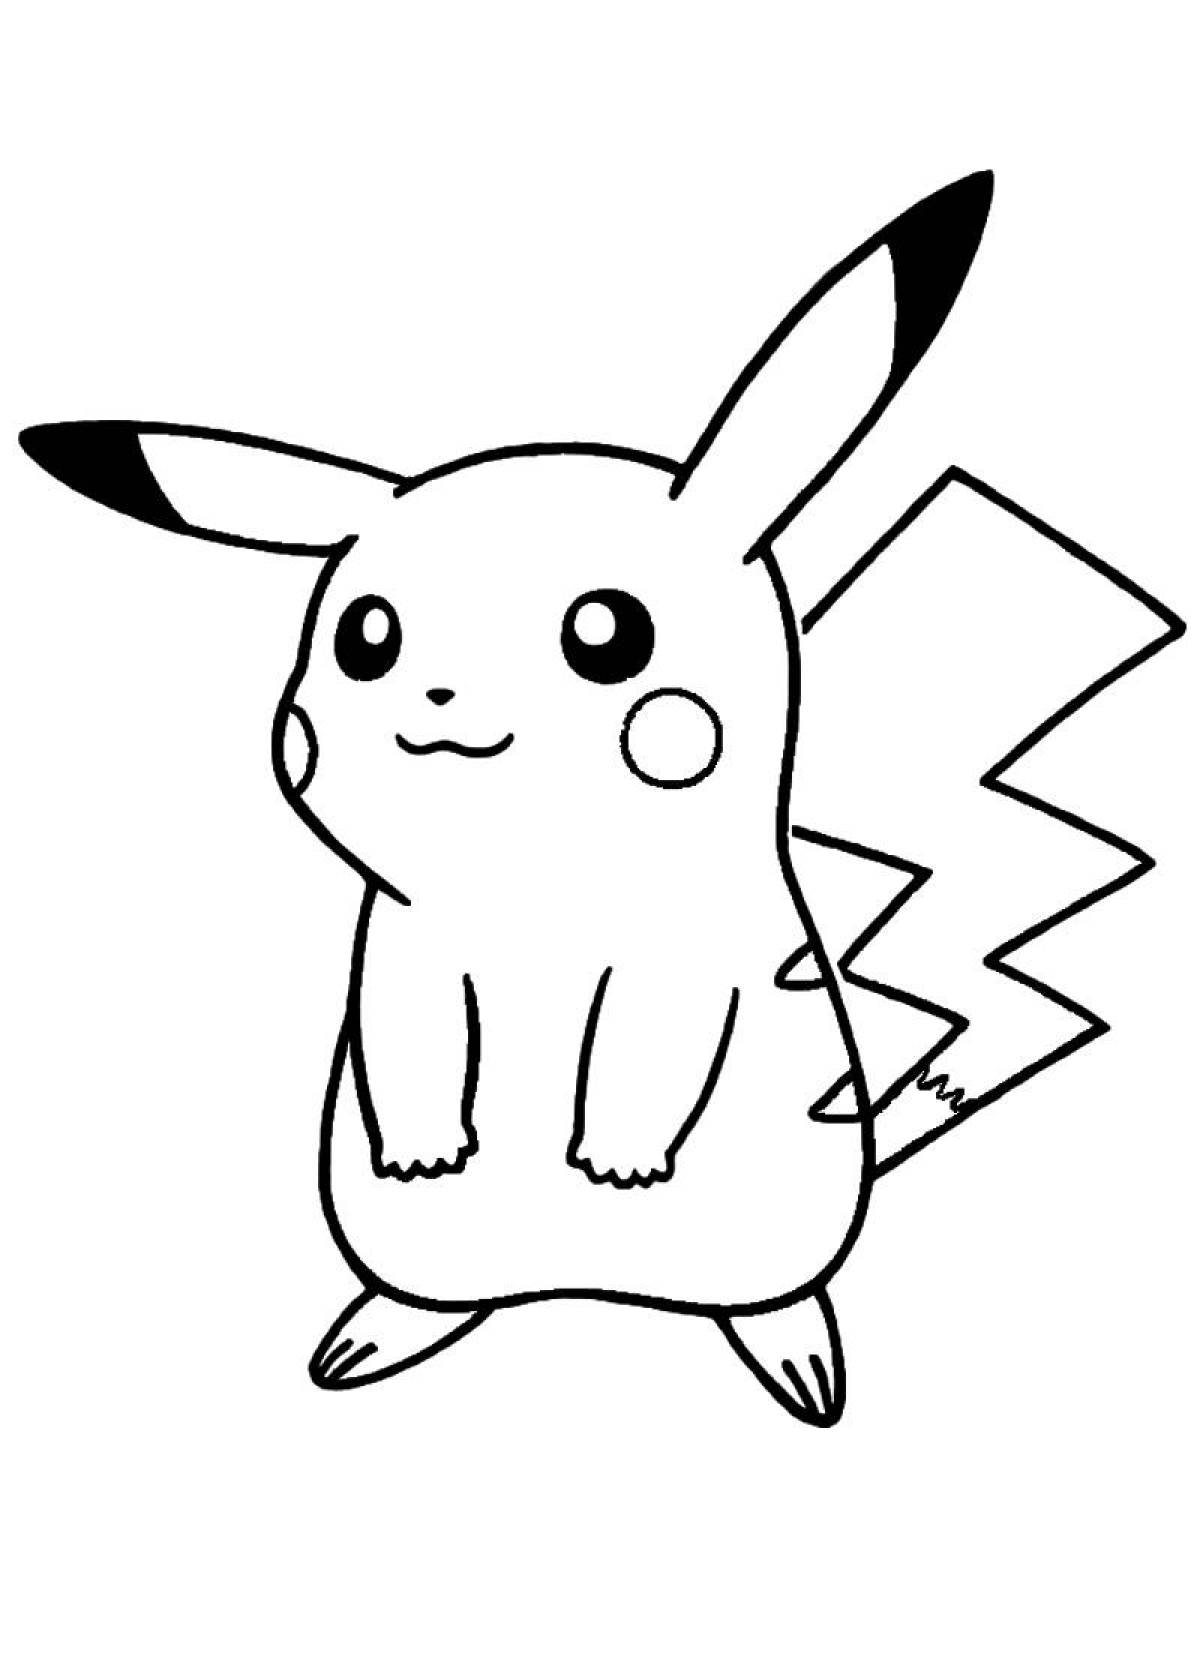 Amazing pikachu coloring page